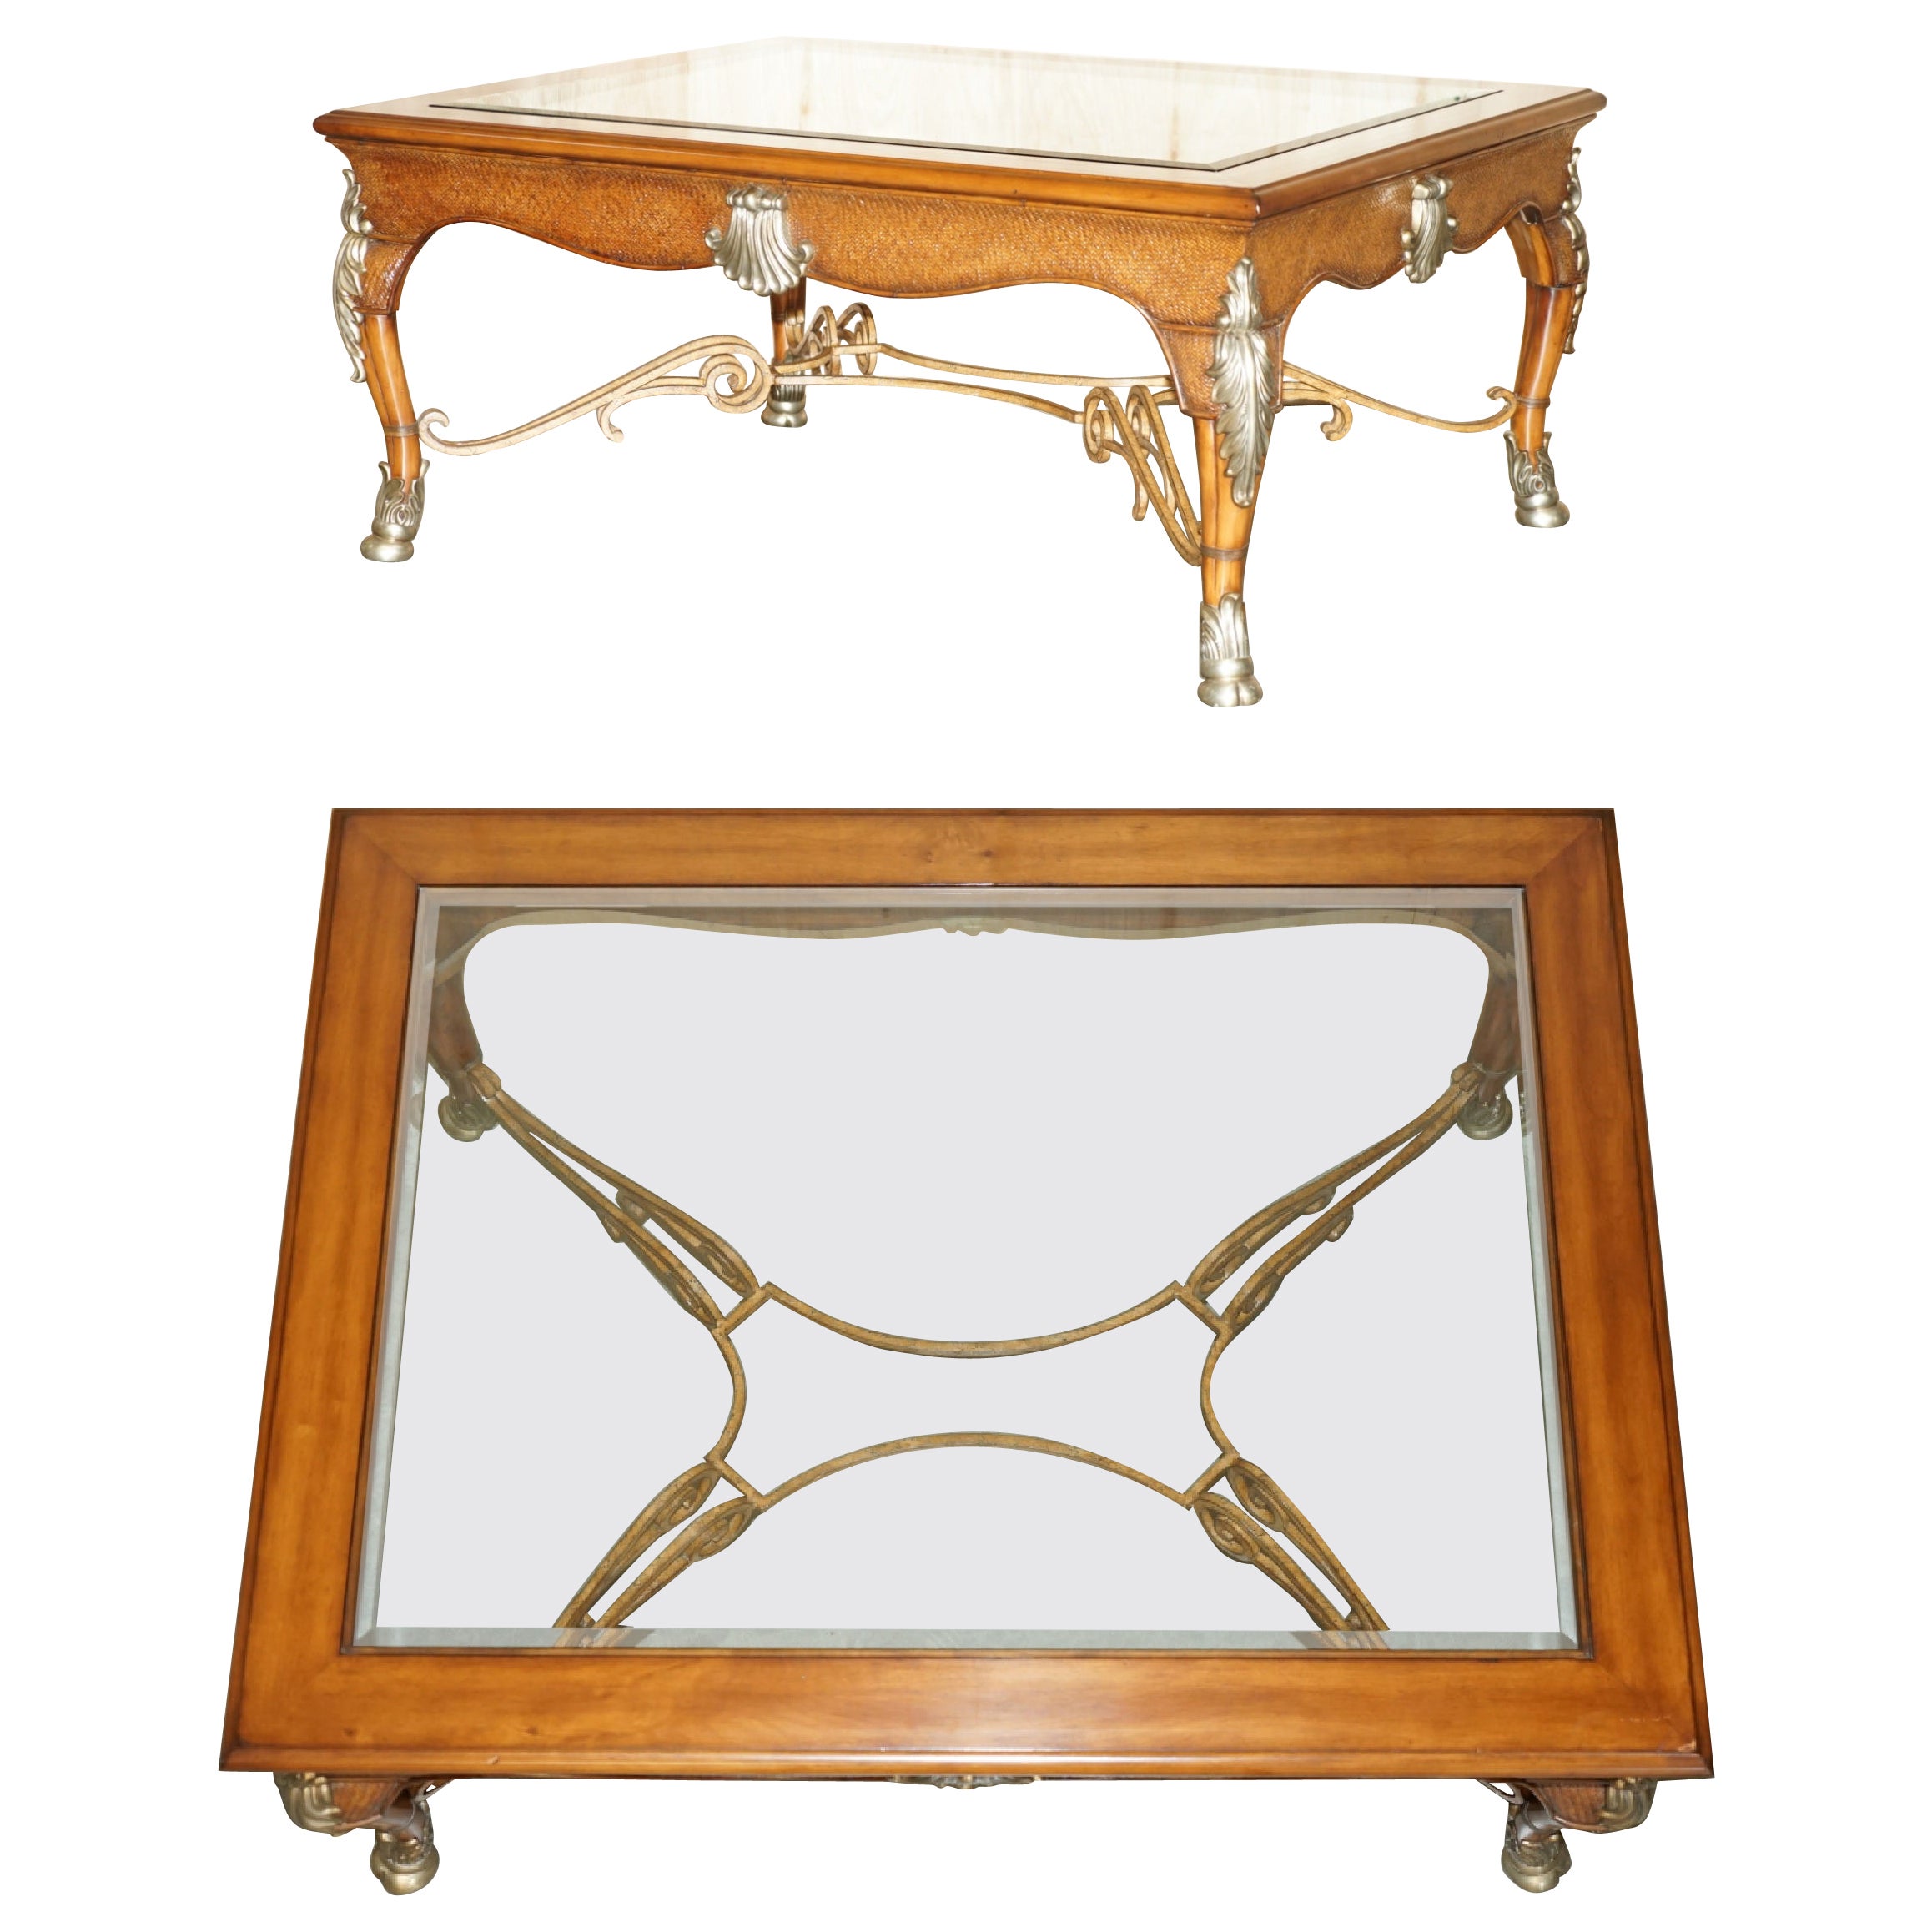 EXQUISITE EXTRA GROSSES THOMASVILLE SAFARI COLLECTION OCCASIONAL COFFEE TABLe